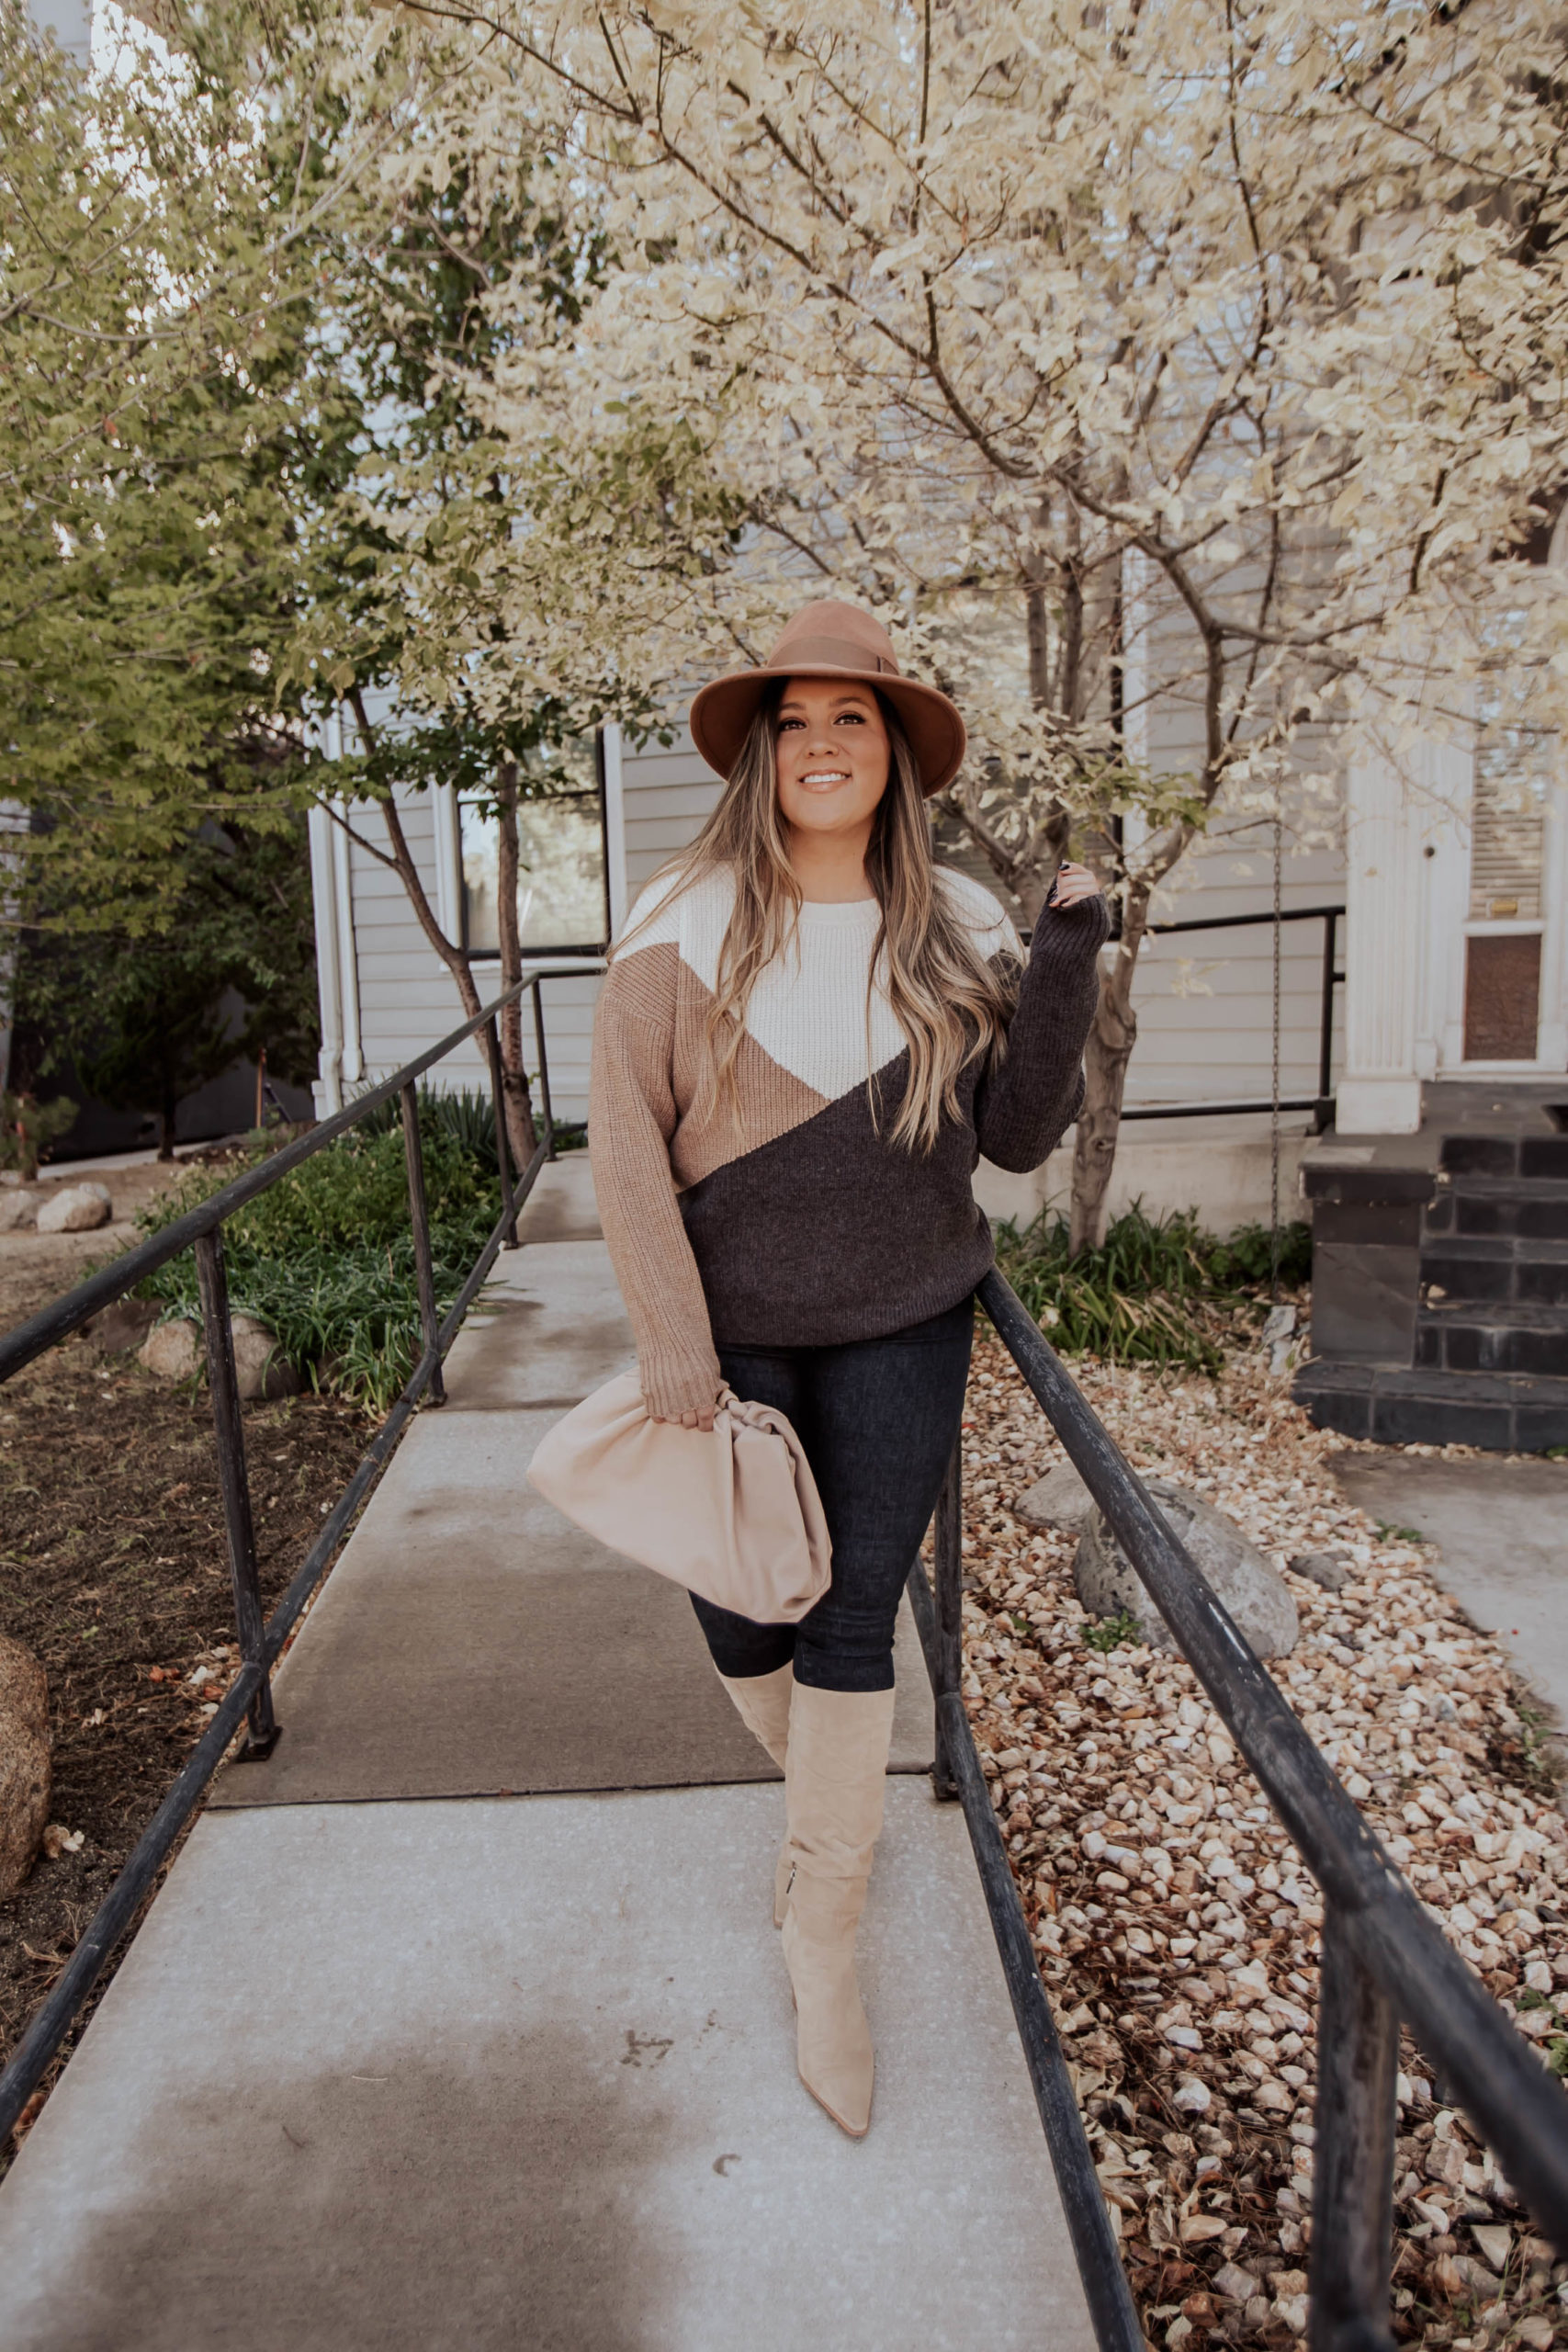 Reno blogger, Ashley Zeal Hurd, from the Ashley and Emily blog shares "Ashley's October Bestsellers" - her top selling items last month!